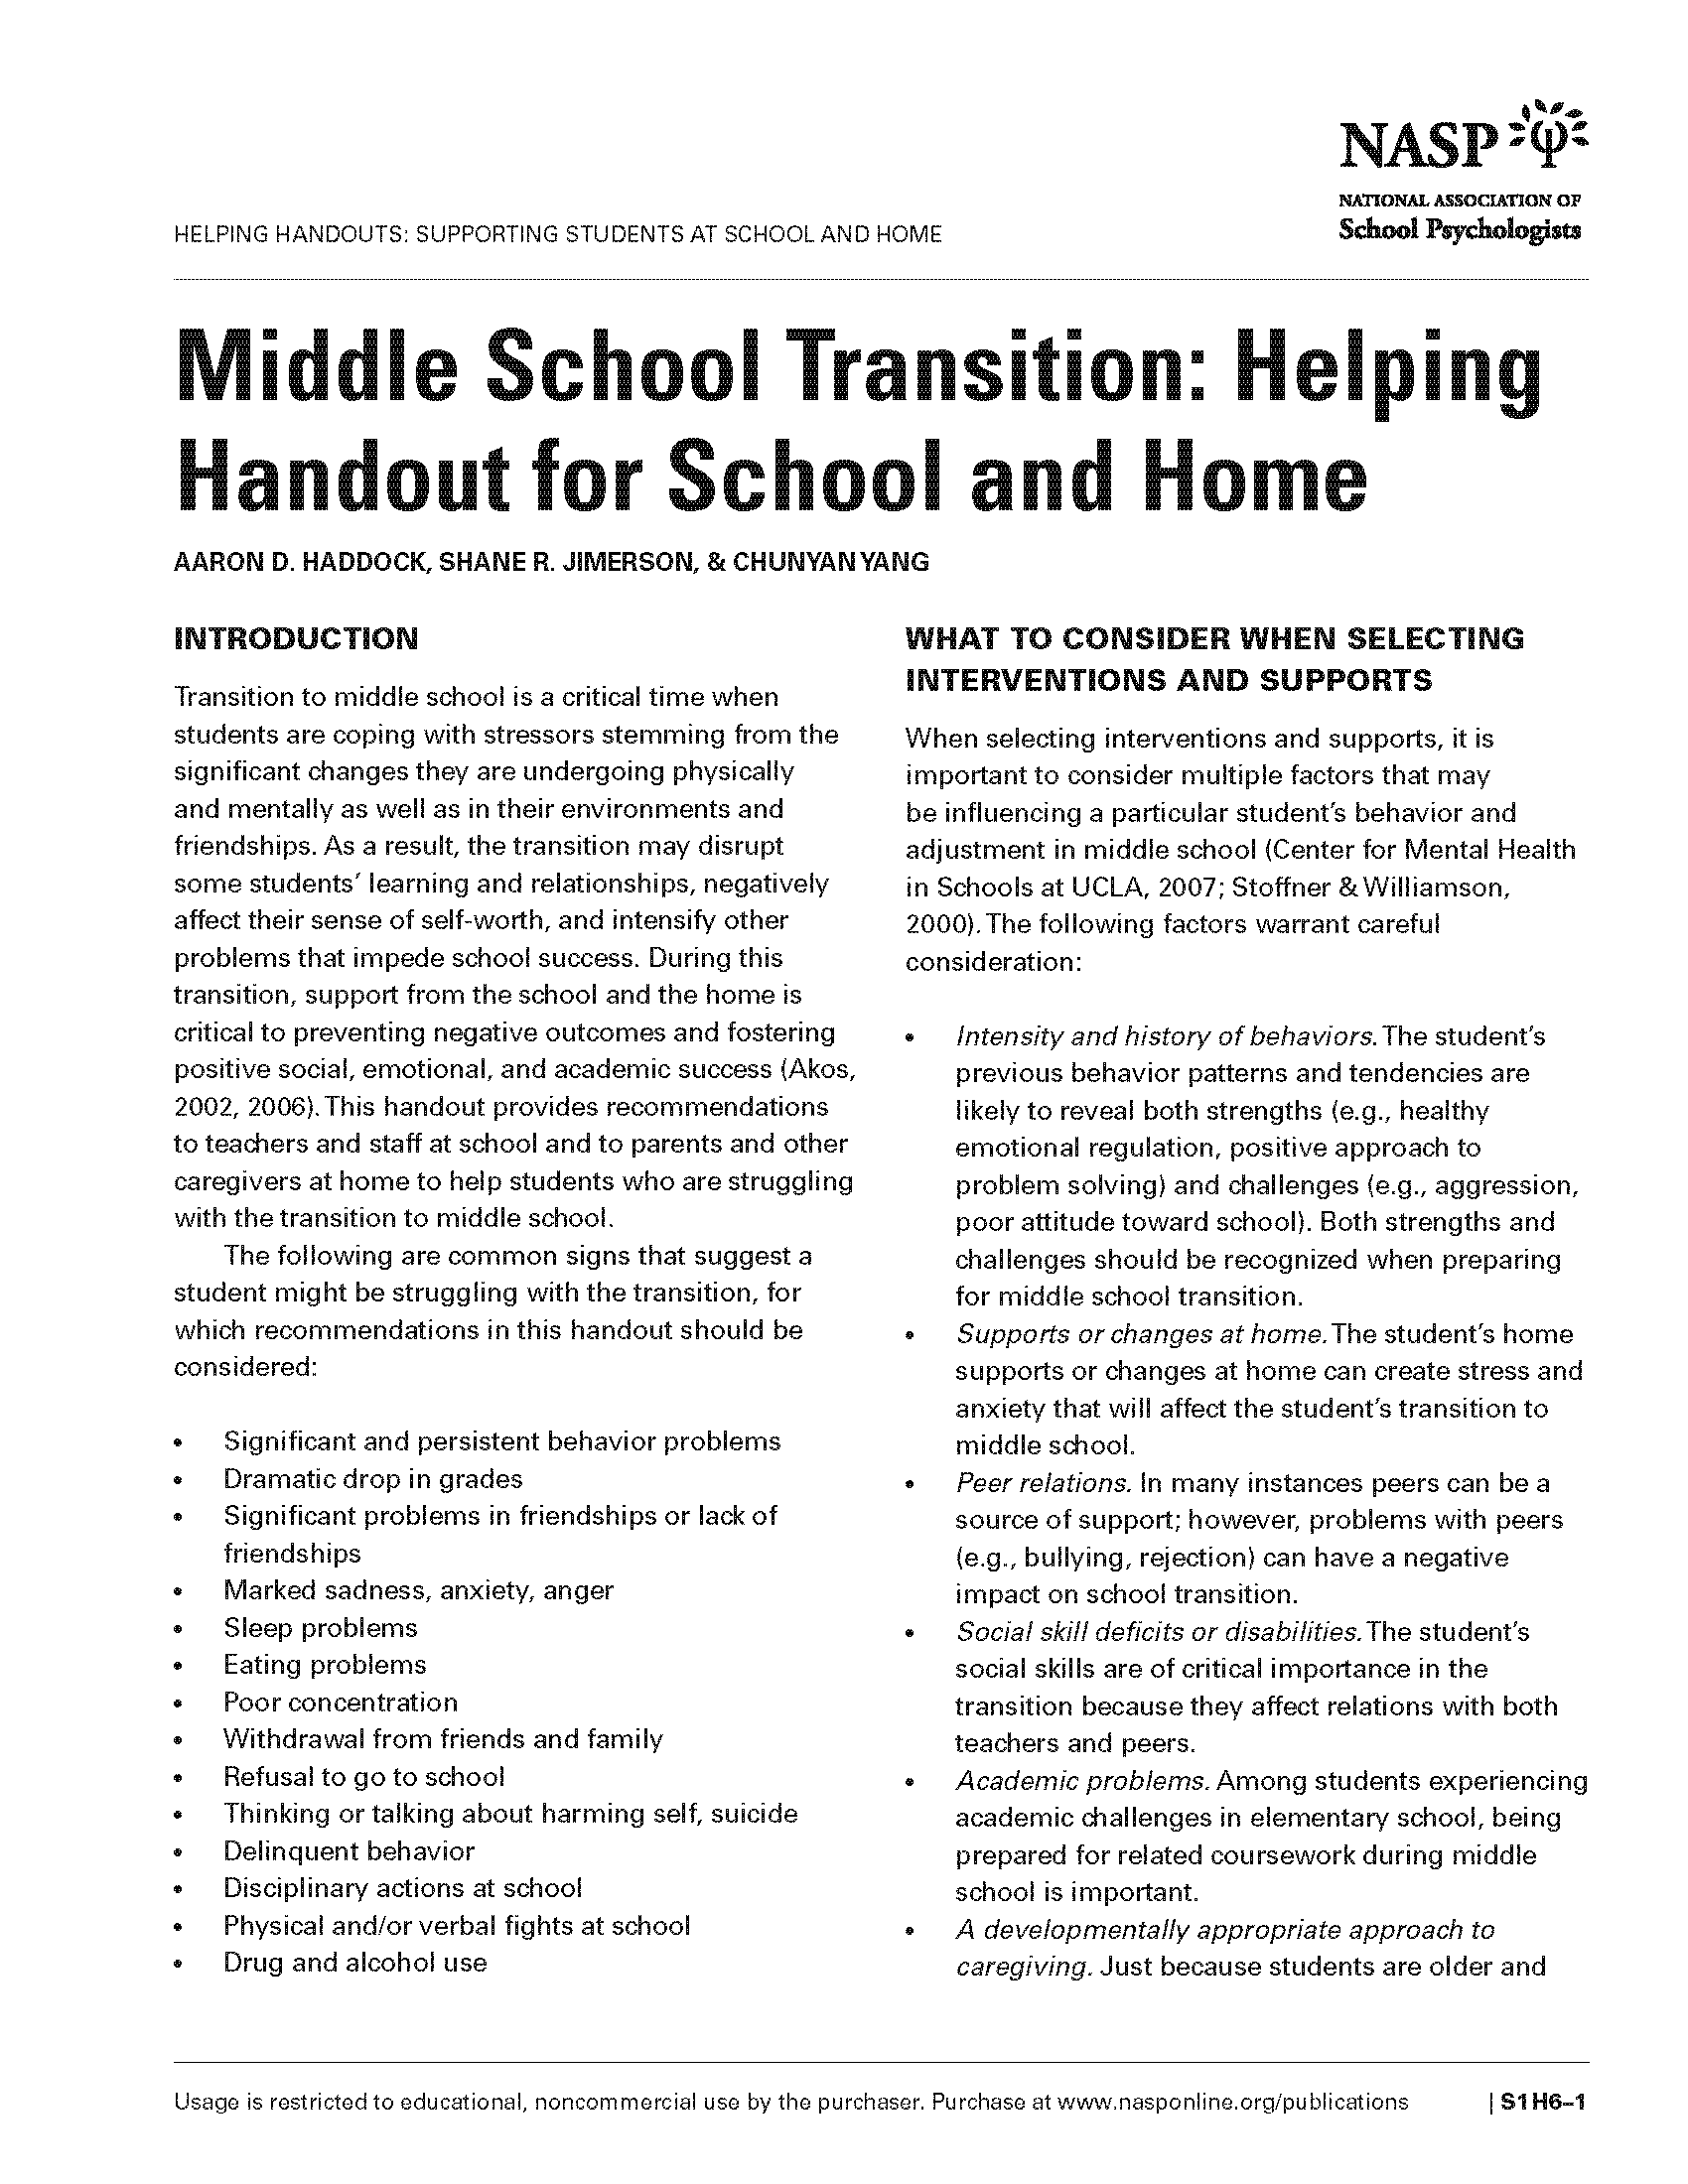 Middle School Transition: Helping Handout for School and Home